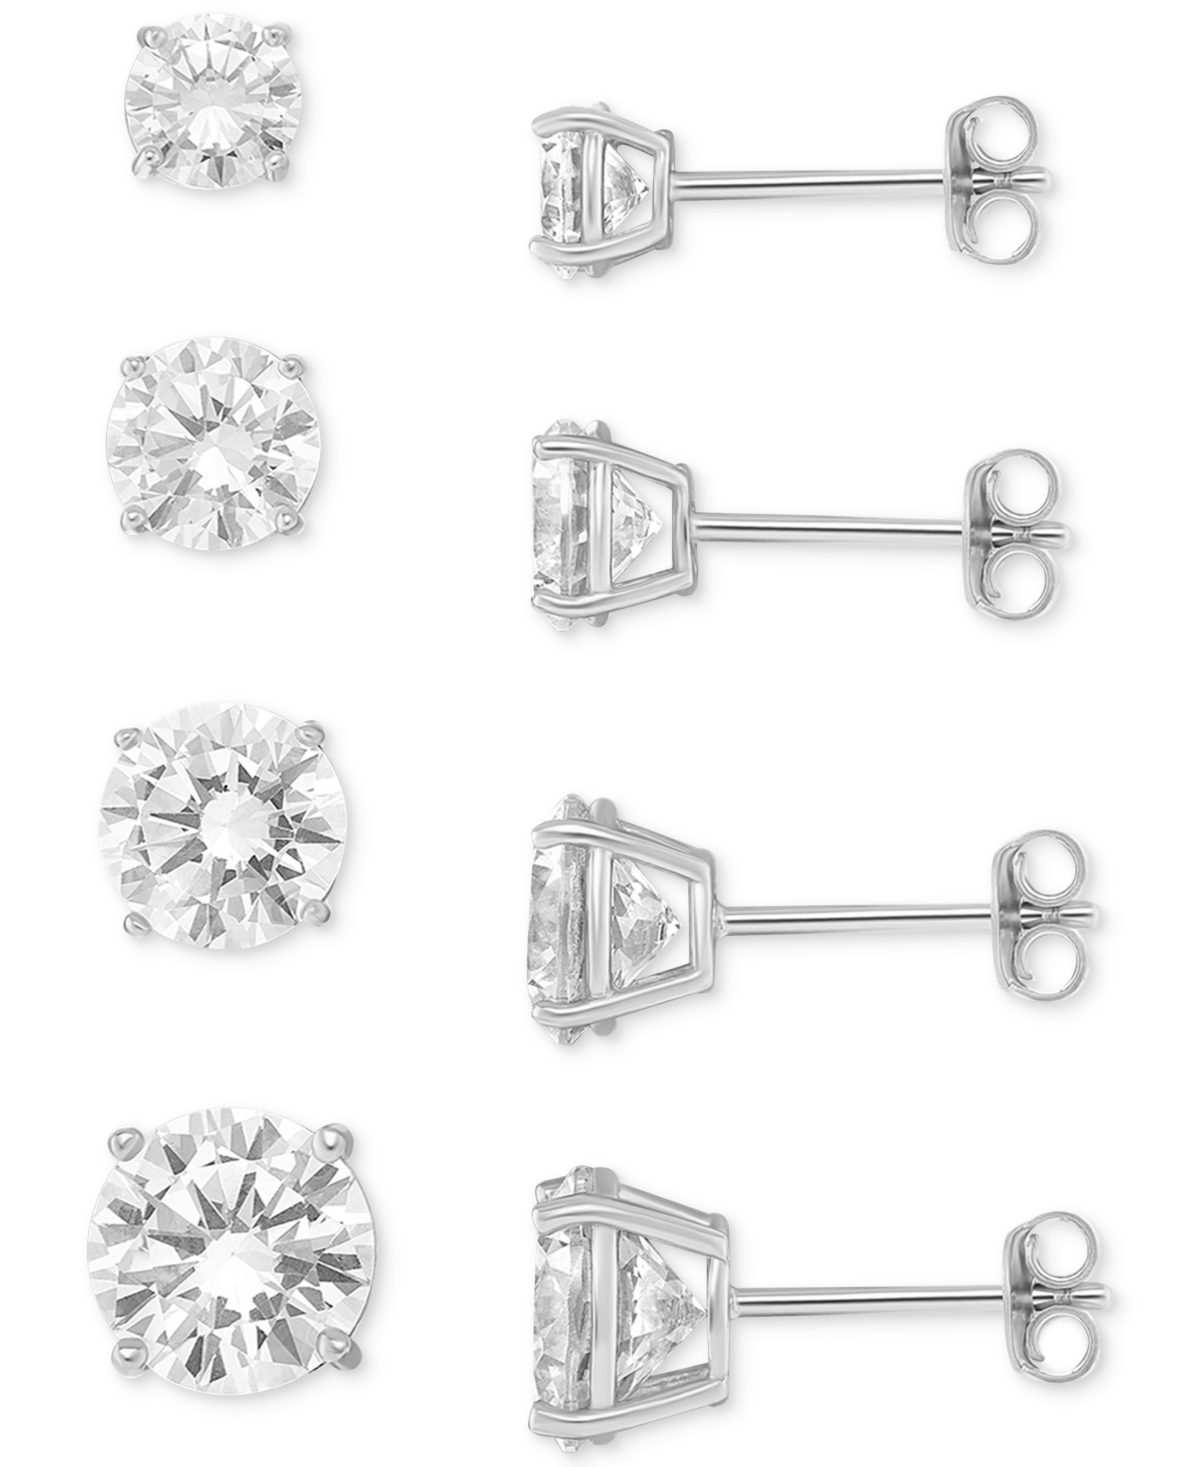 4-Pc. Set Cubic Zirconia Graduated Solitaire Stud Earrings in Sterling Silver, Created for Macy's - Sterling Silver